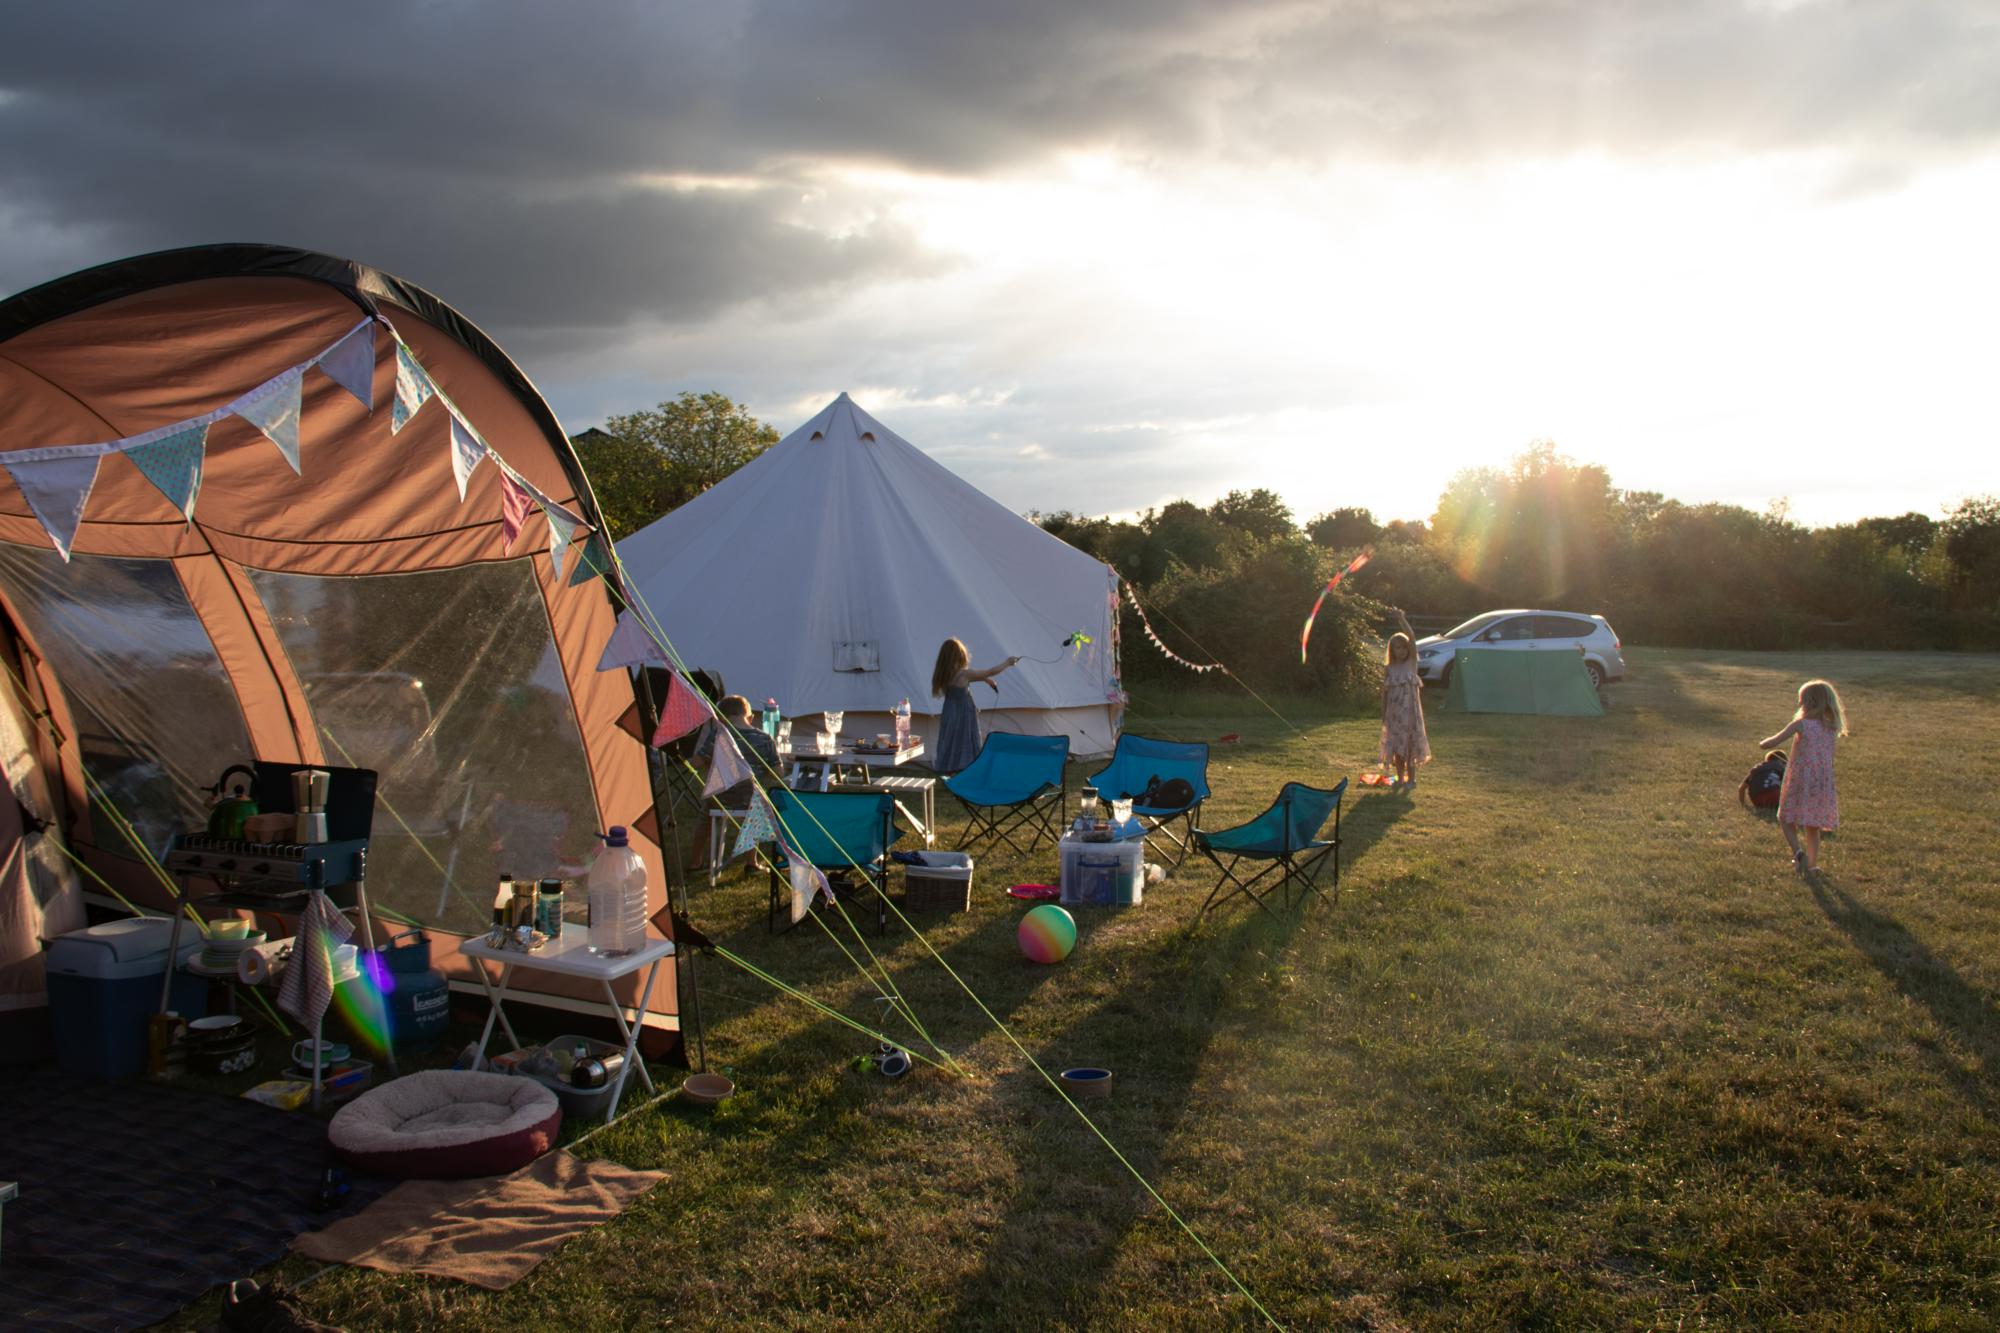 Cuckoo Fen Campsite opened for the first time in the summer of 2020.